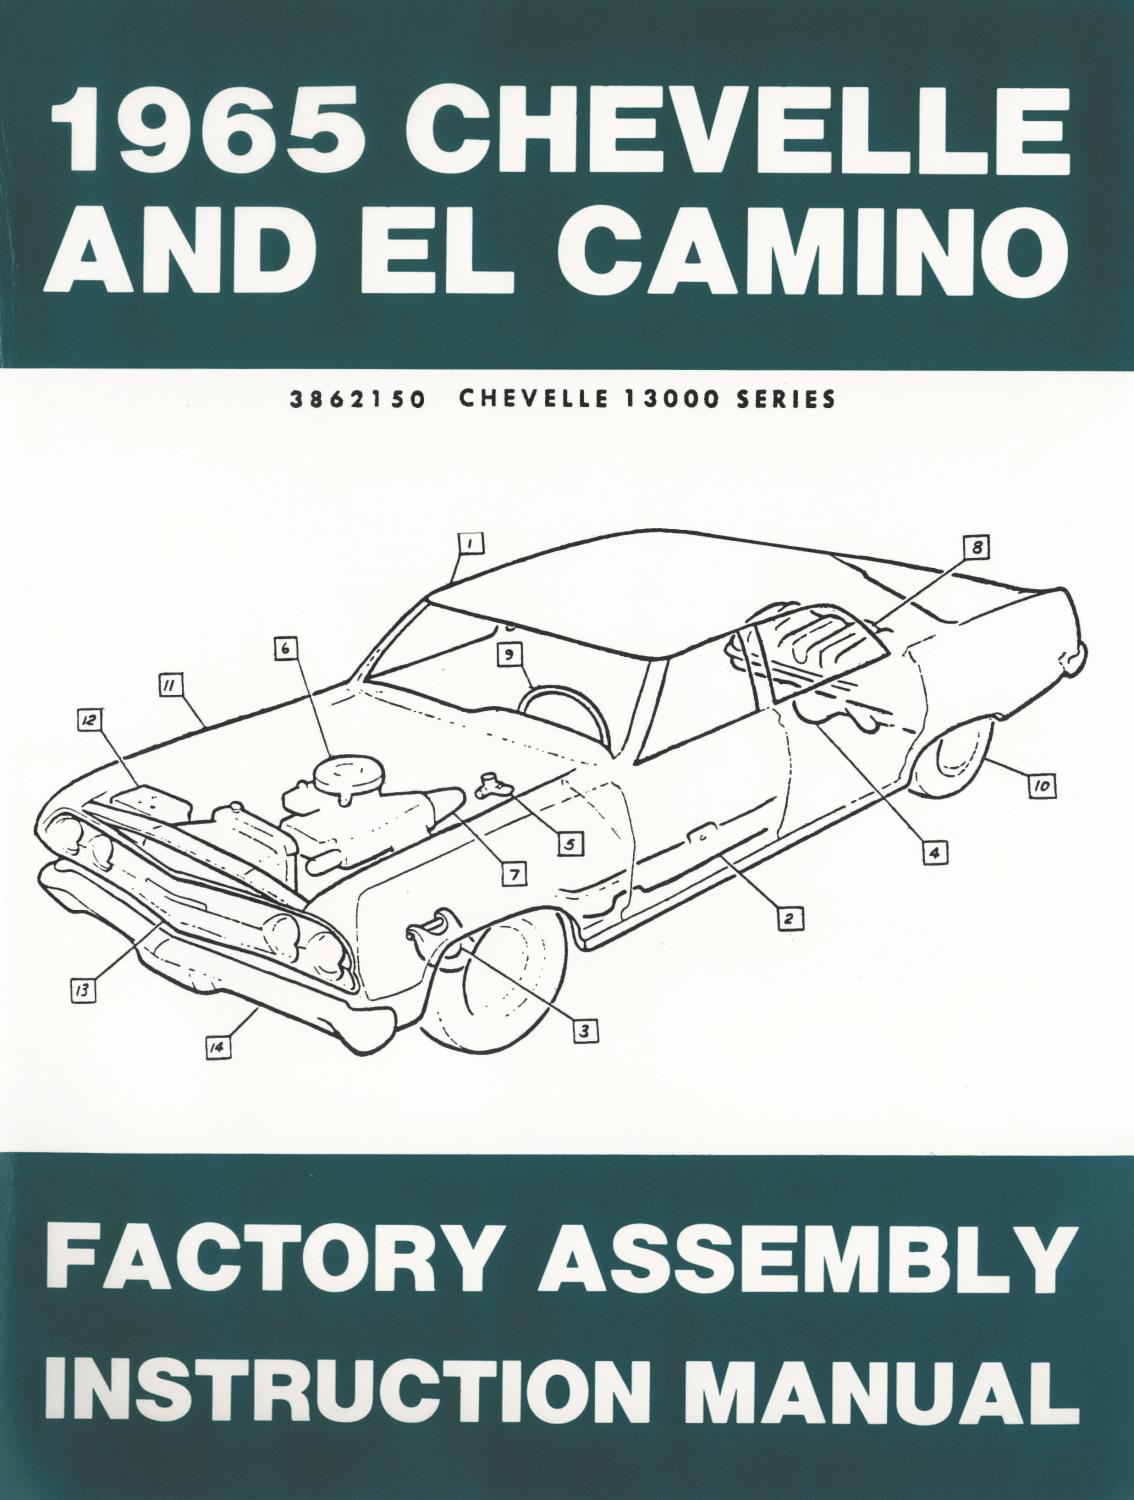 Factory Assembly Instruction Manual for 1965 Chevrolet Chevelle and El Camino